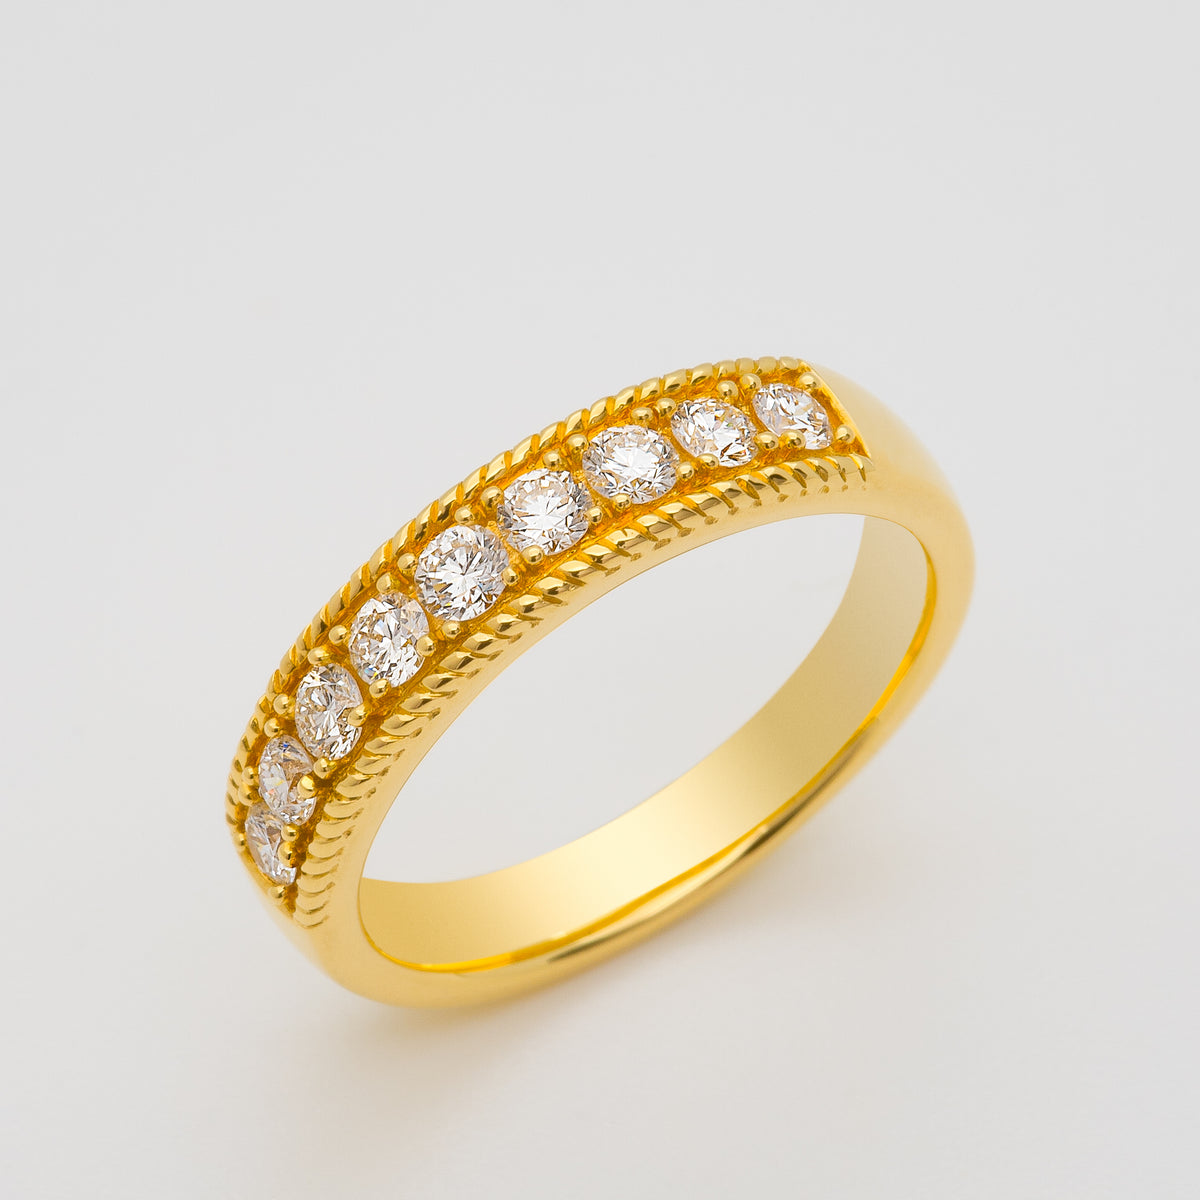 Unearth The Real Meaning of Wedding Rings Sona Jewelers